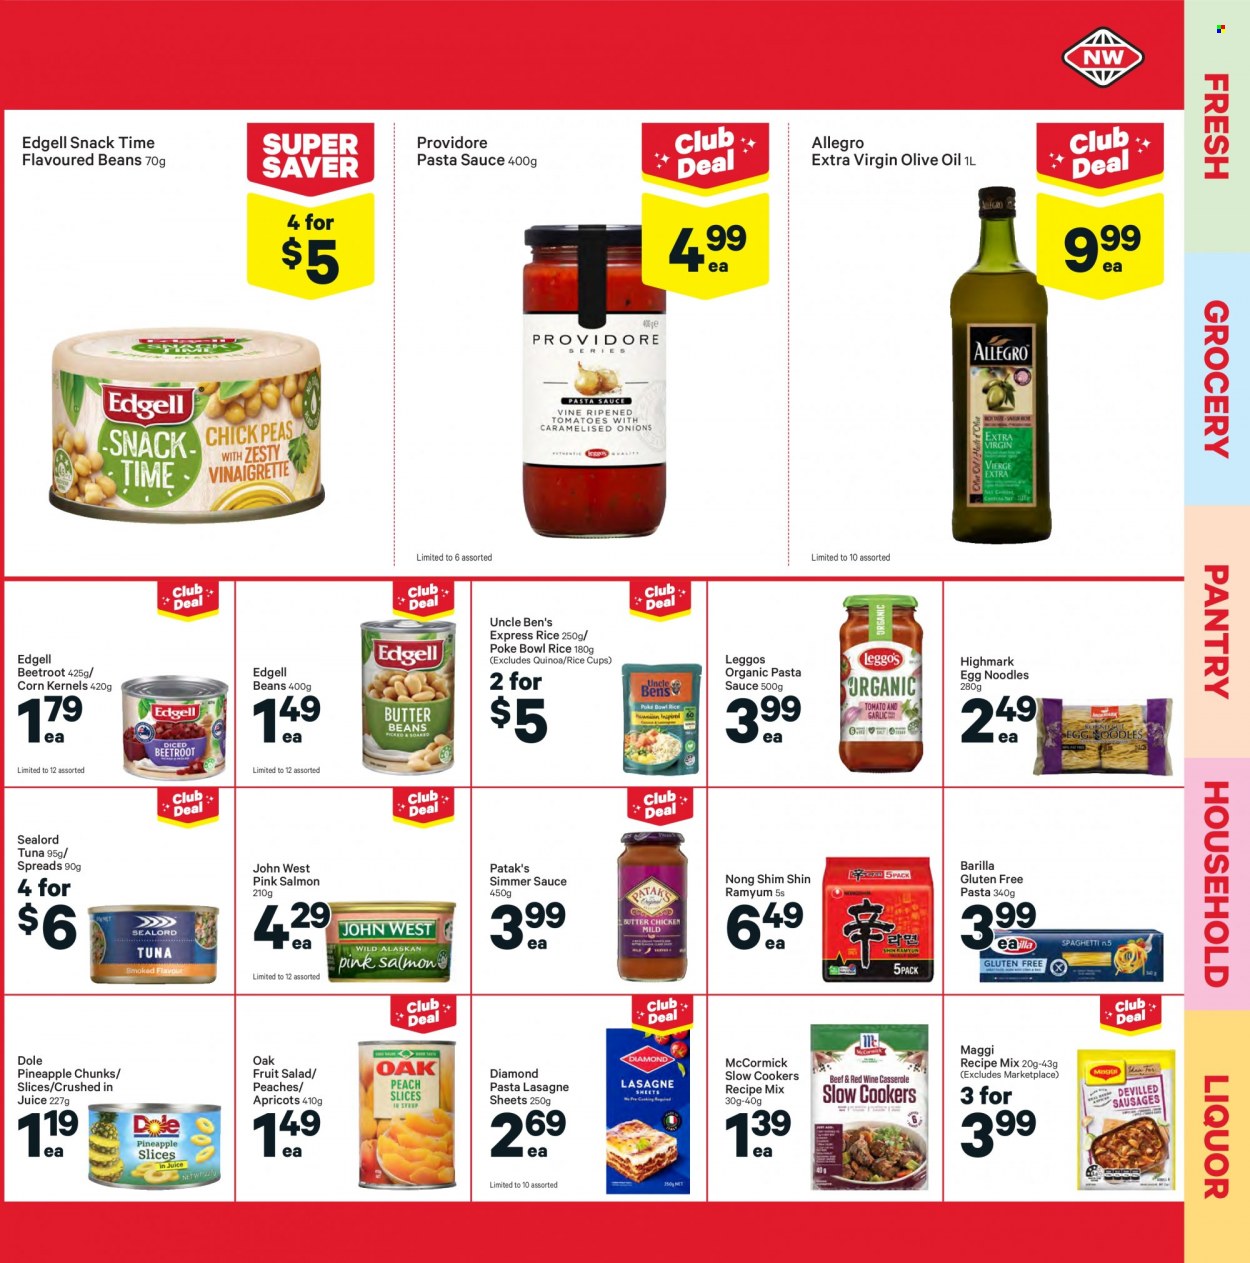 thumbnail - New World mailer - 20.09.2021 - 26.09.2021 - Sales products - beans, corn, Dole, pineapple, apricots, peaches, salmon, tuna, Sealord, pasta sauce, sauce, Barilla, noodles, snack, Maggi, Uncle Ben's, sealord tuna, fruit salad, lasagne sheets, quinoa, rice, egg noodles, extra virgin olive oil, olive oil, oil, juice, liquor, cup, bowl. Page 11.